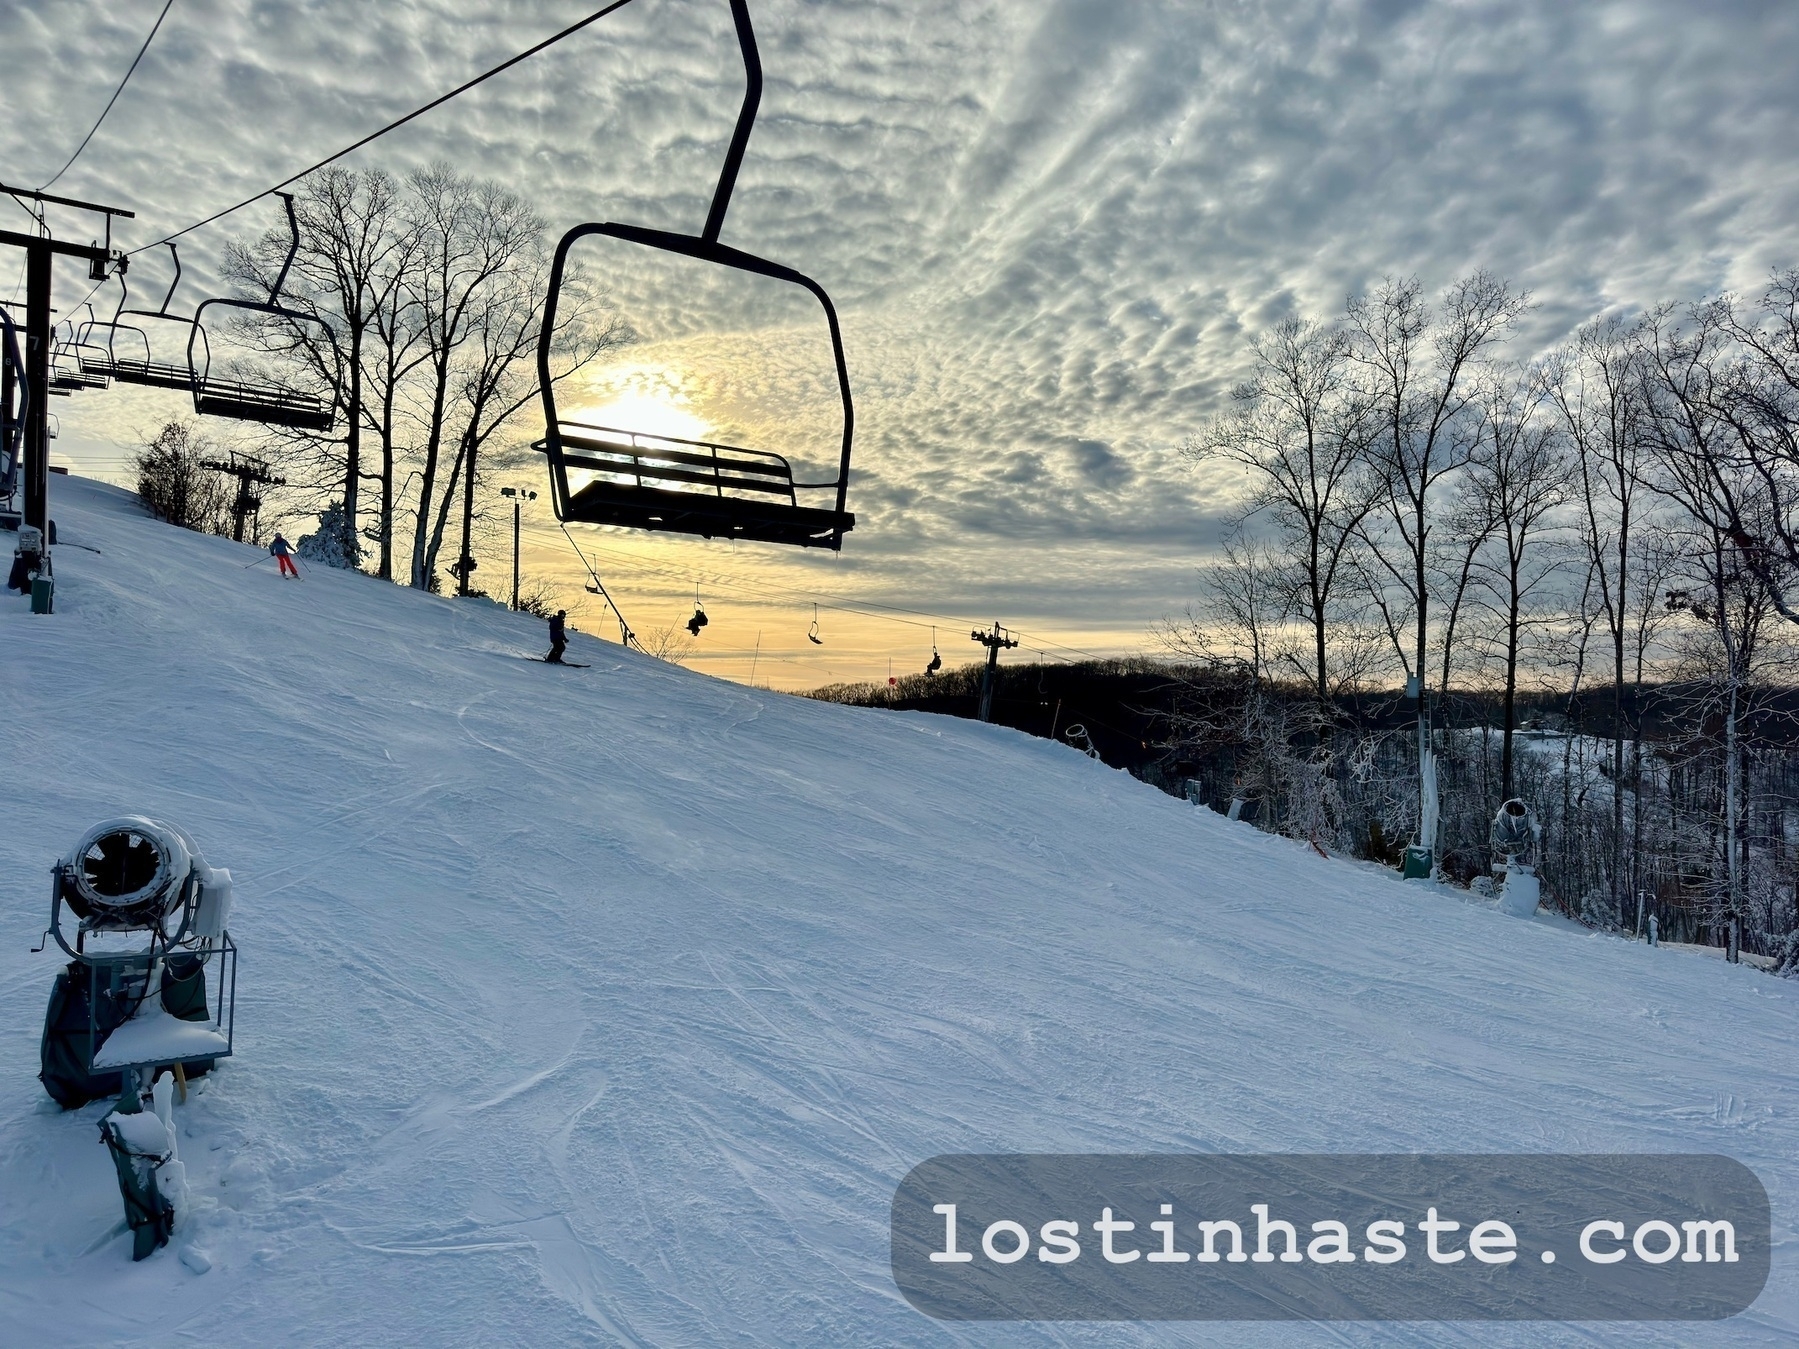 Ski lift chairs ascend above a snowy slope with skiers; textured clouds and a setting sun provide the backdrop.